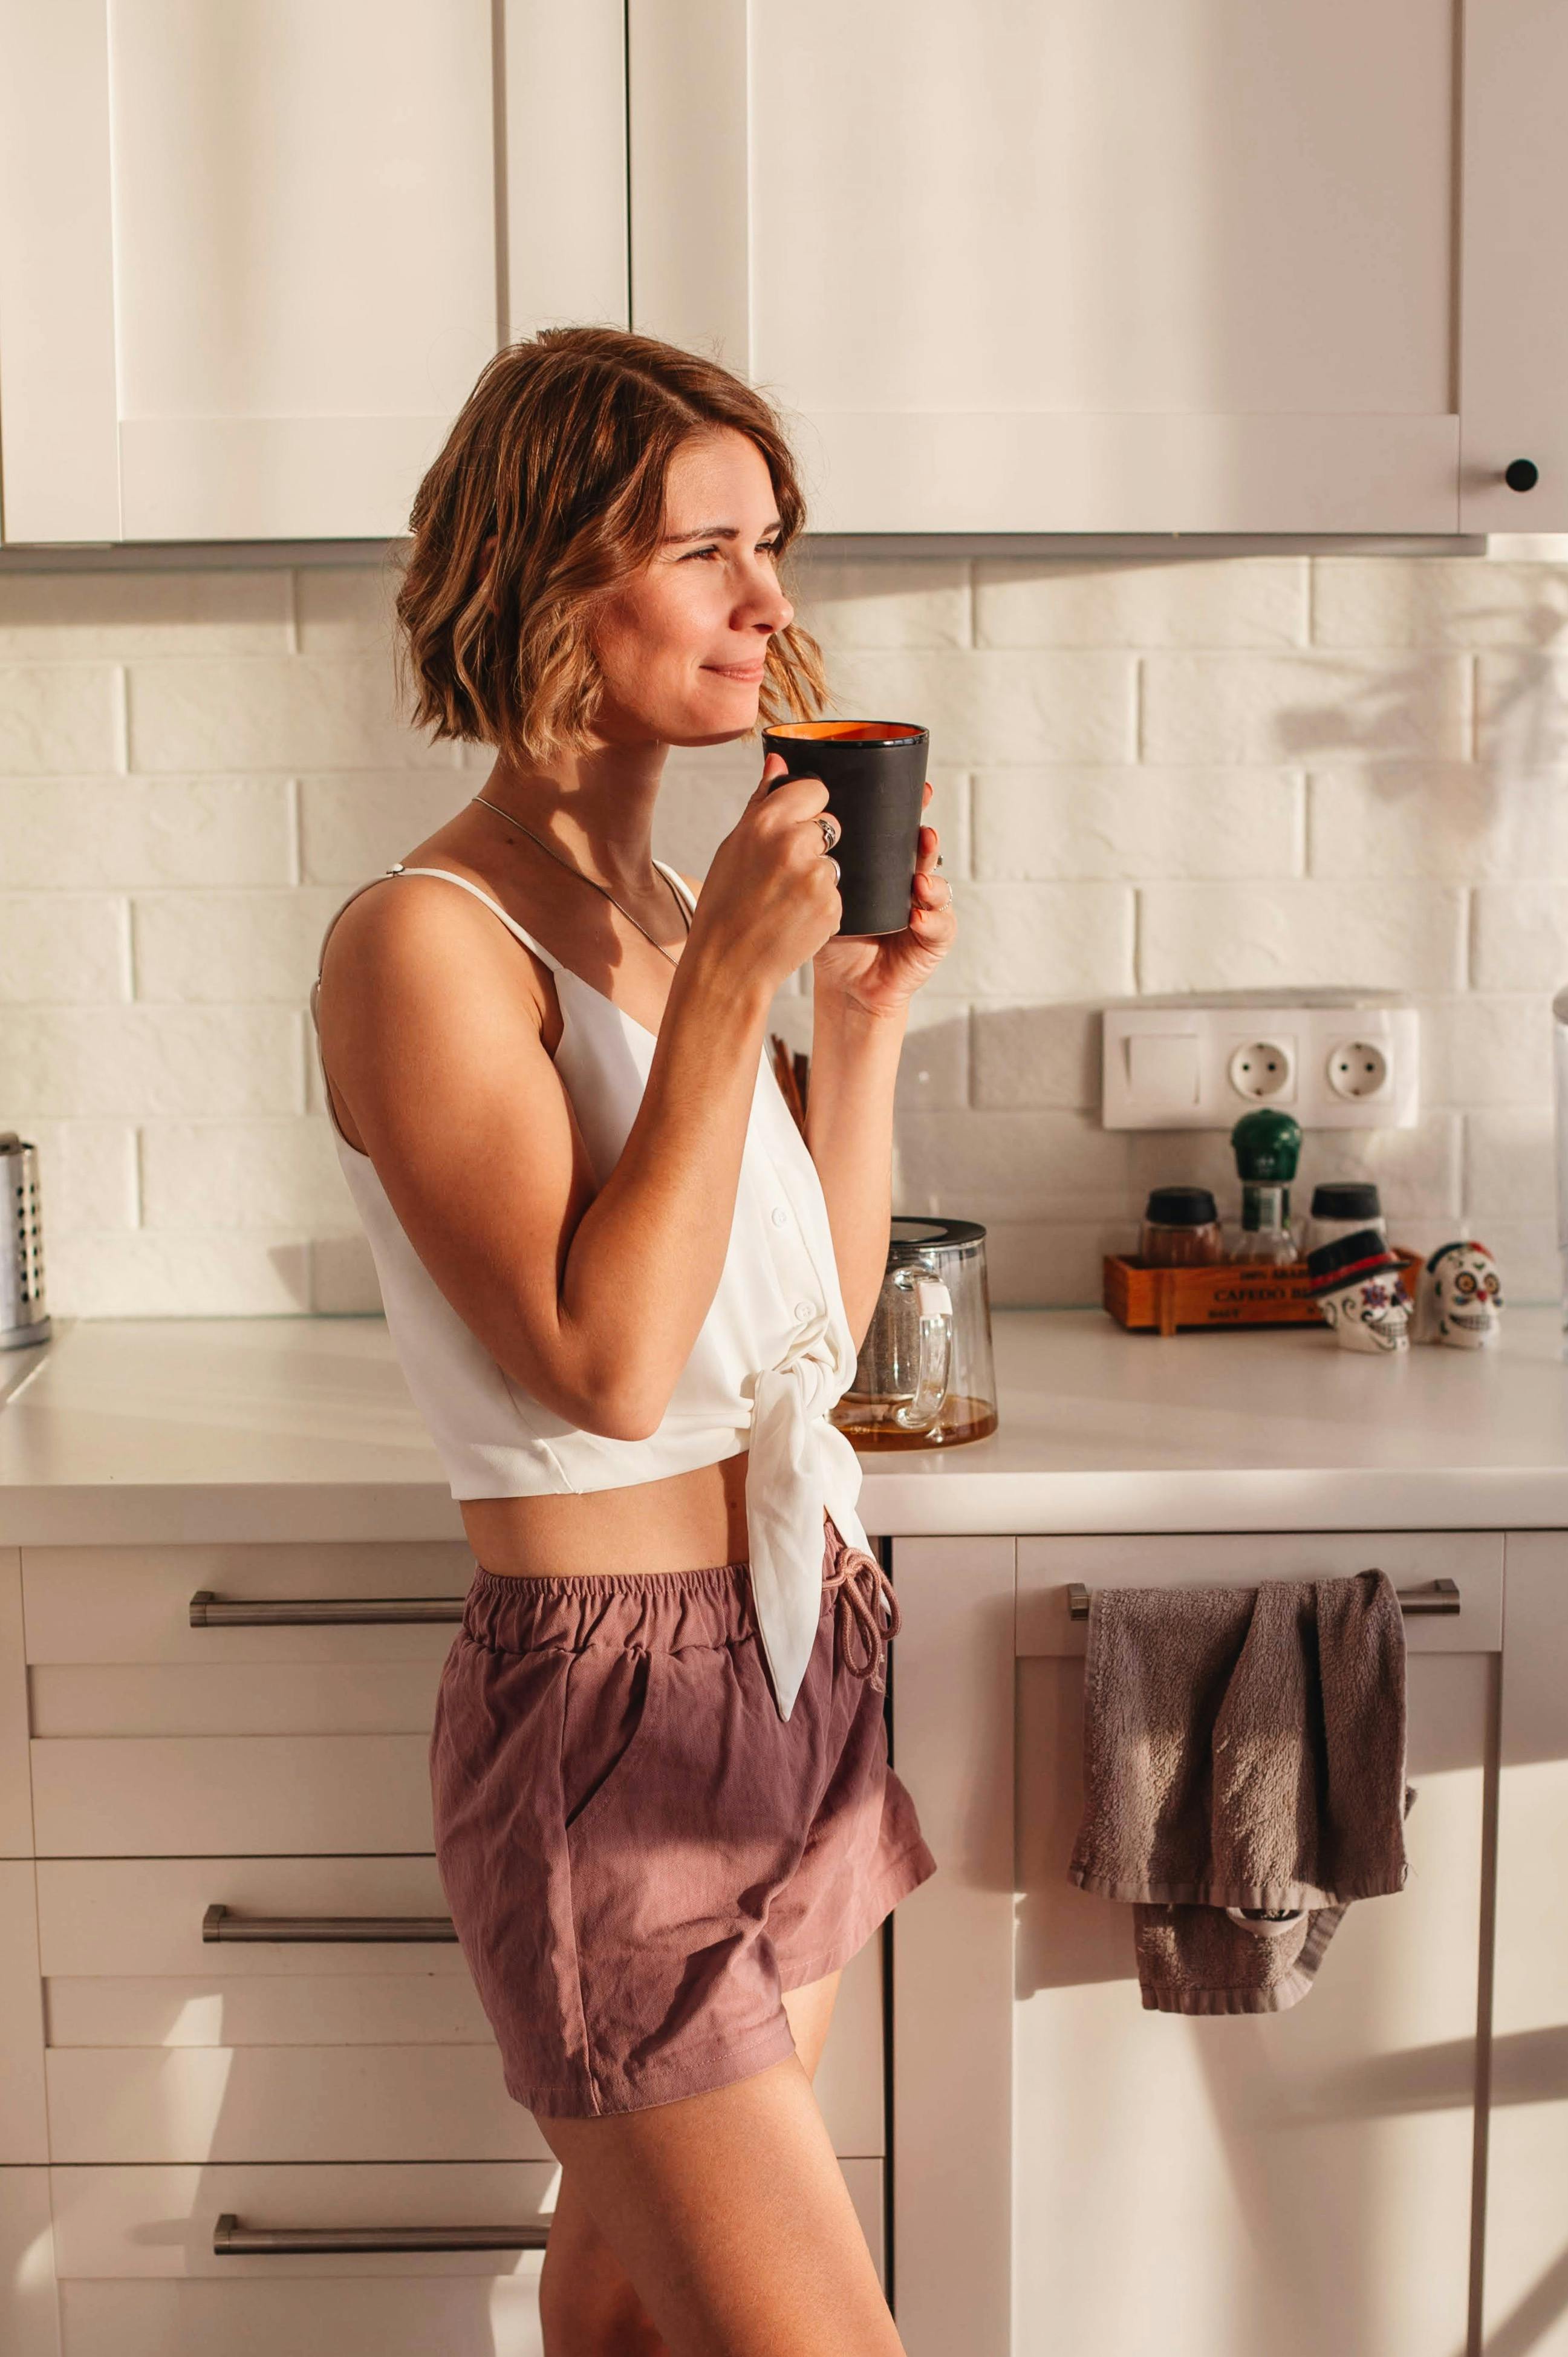 A woman enjoying a cup of coffee | Source: Pexels